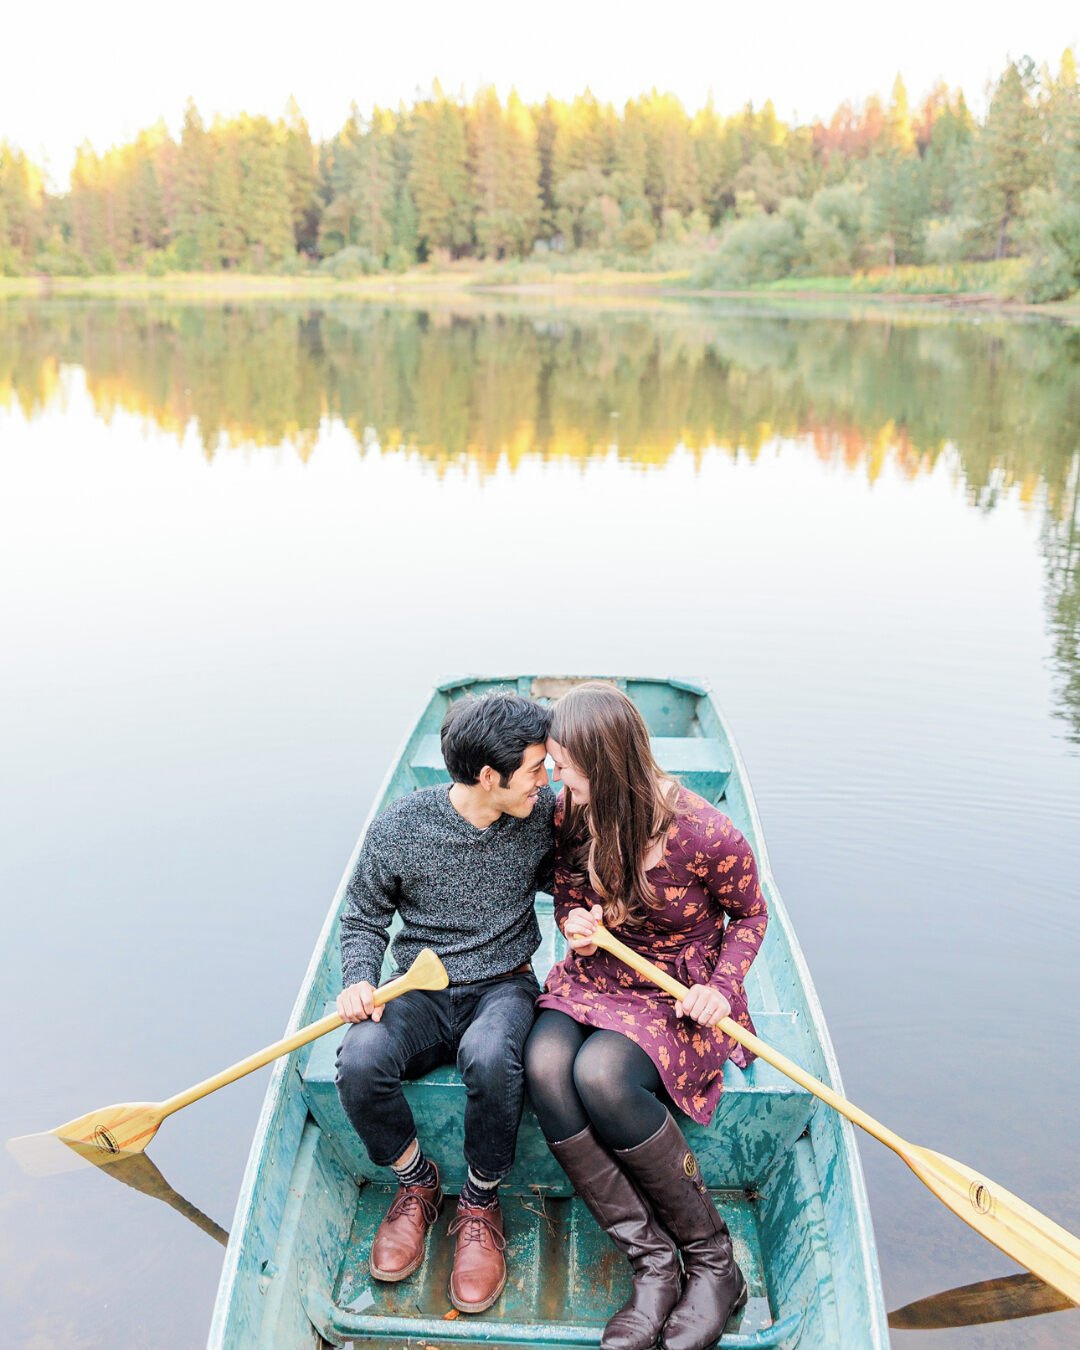 Engagement sessions at the Lake require a snuggle-filled row boat session 🌿⁣
Photo: @sophiajensenphoto